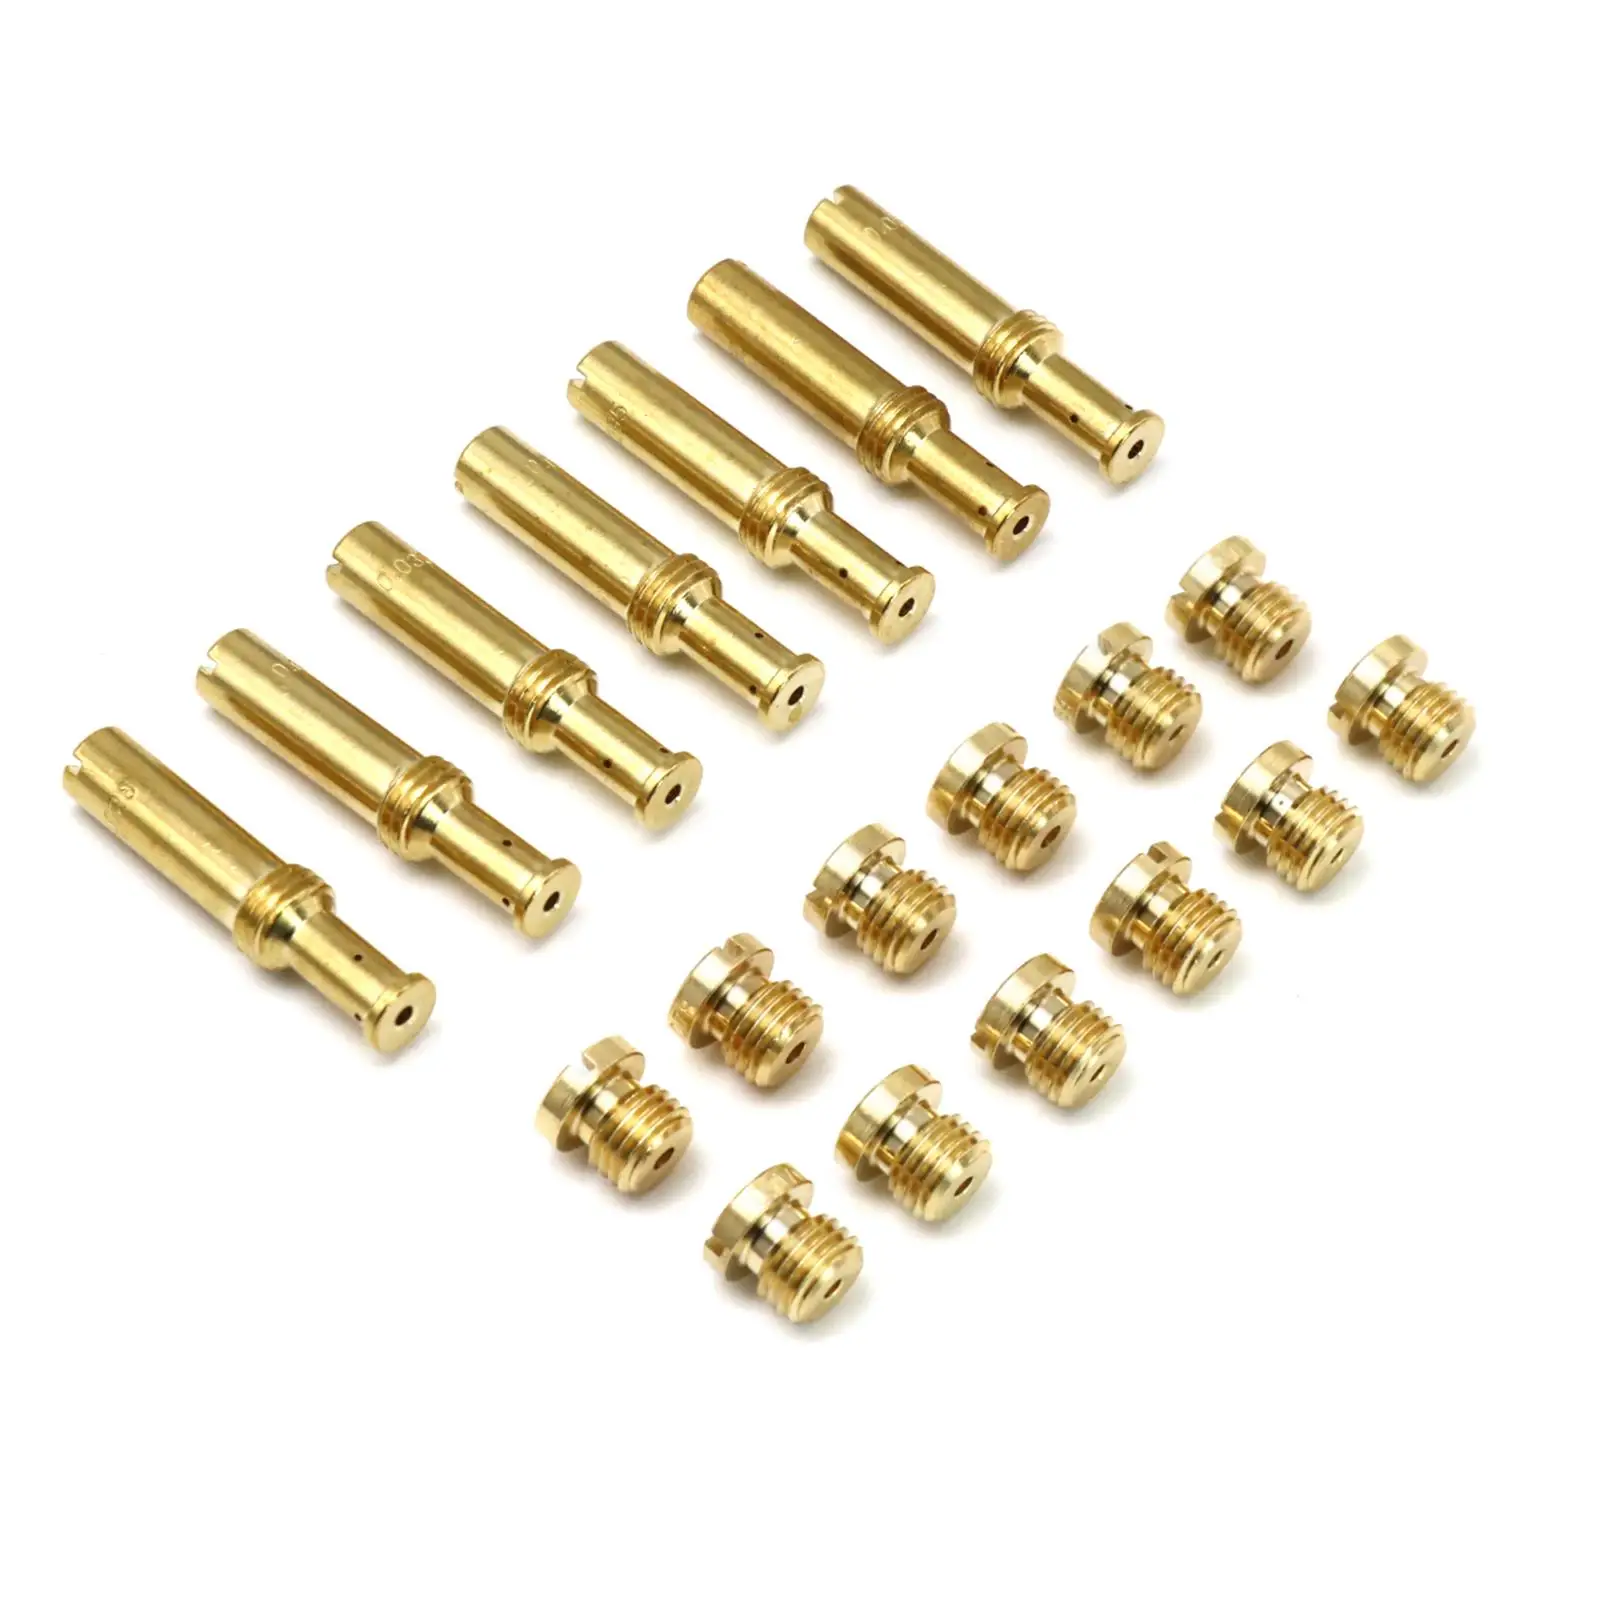 19 Pieces Jet Kit Includes 7 Intermediate Jets 12 Main Jets for S&S Cycle Super B E G Carbs Carburetors Accessory